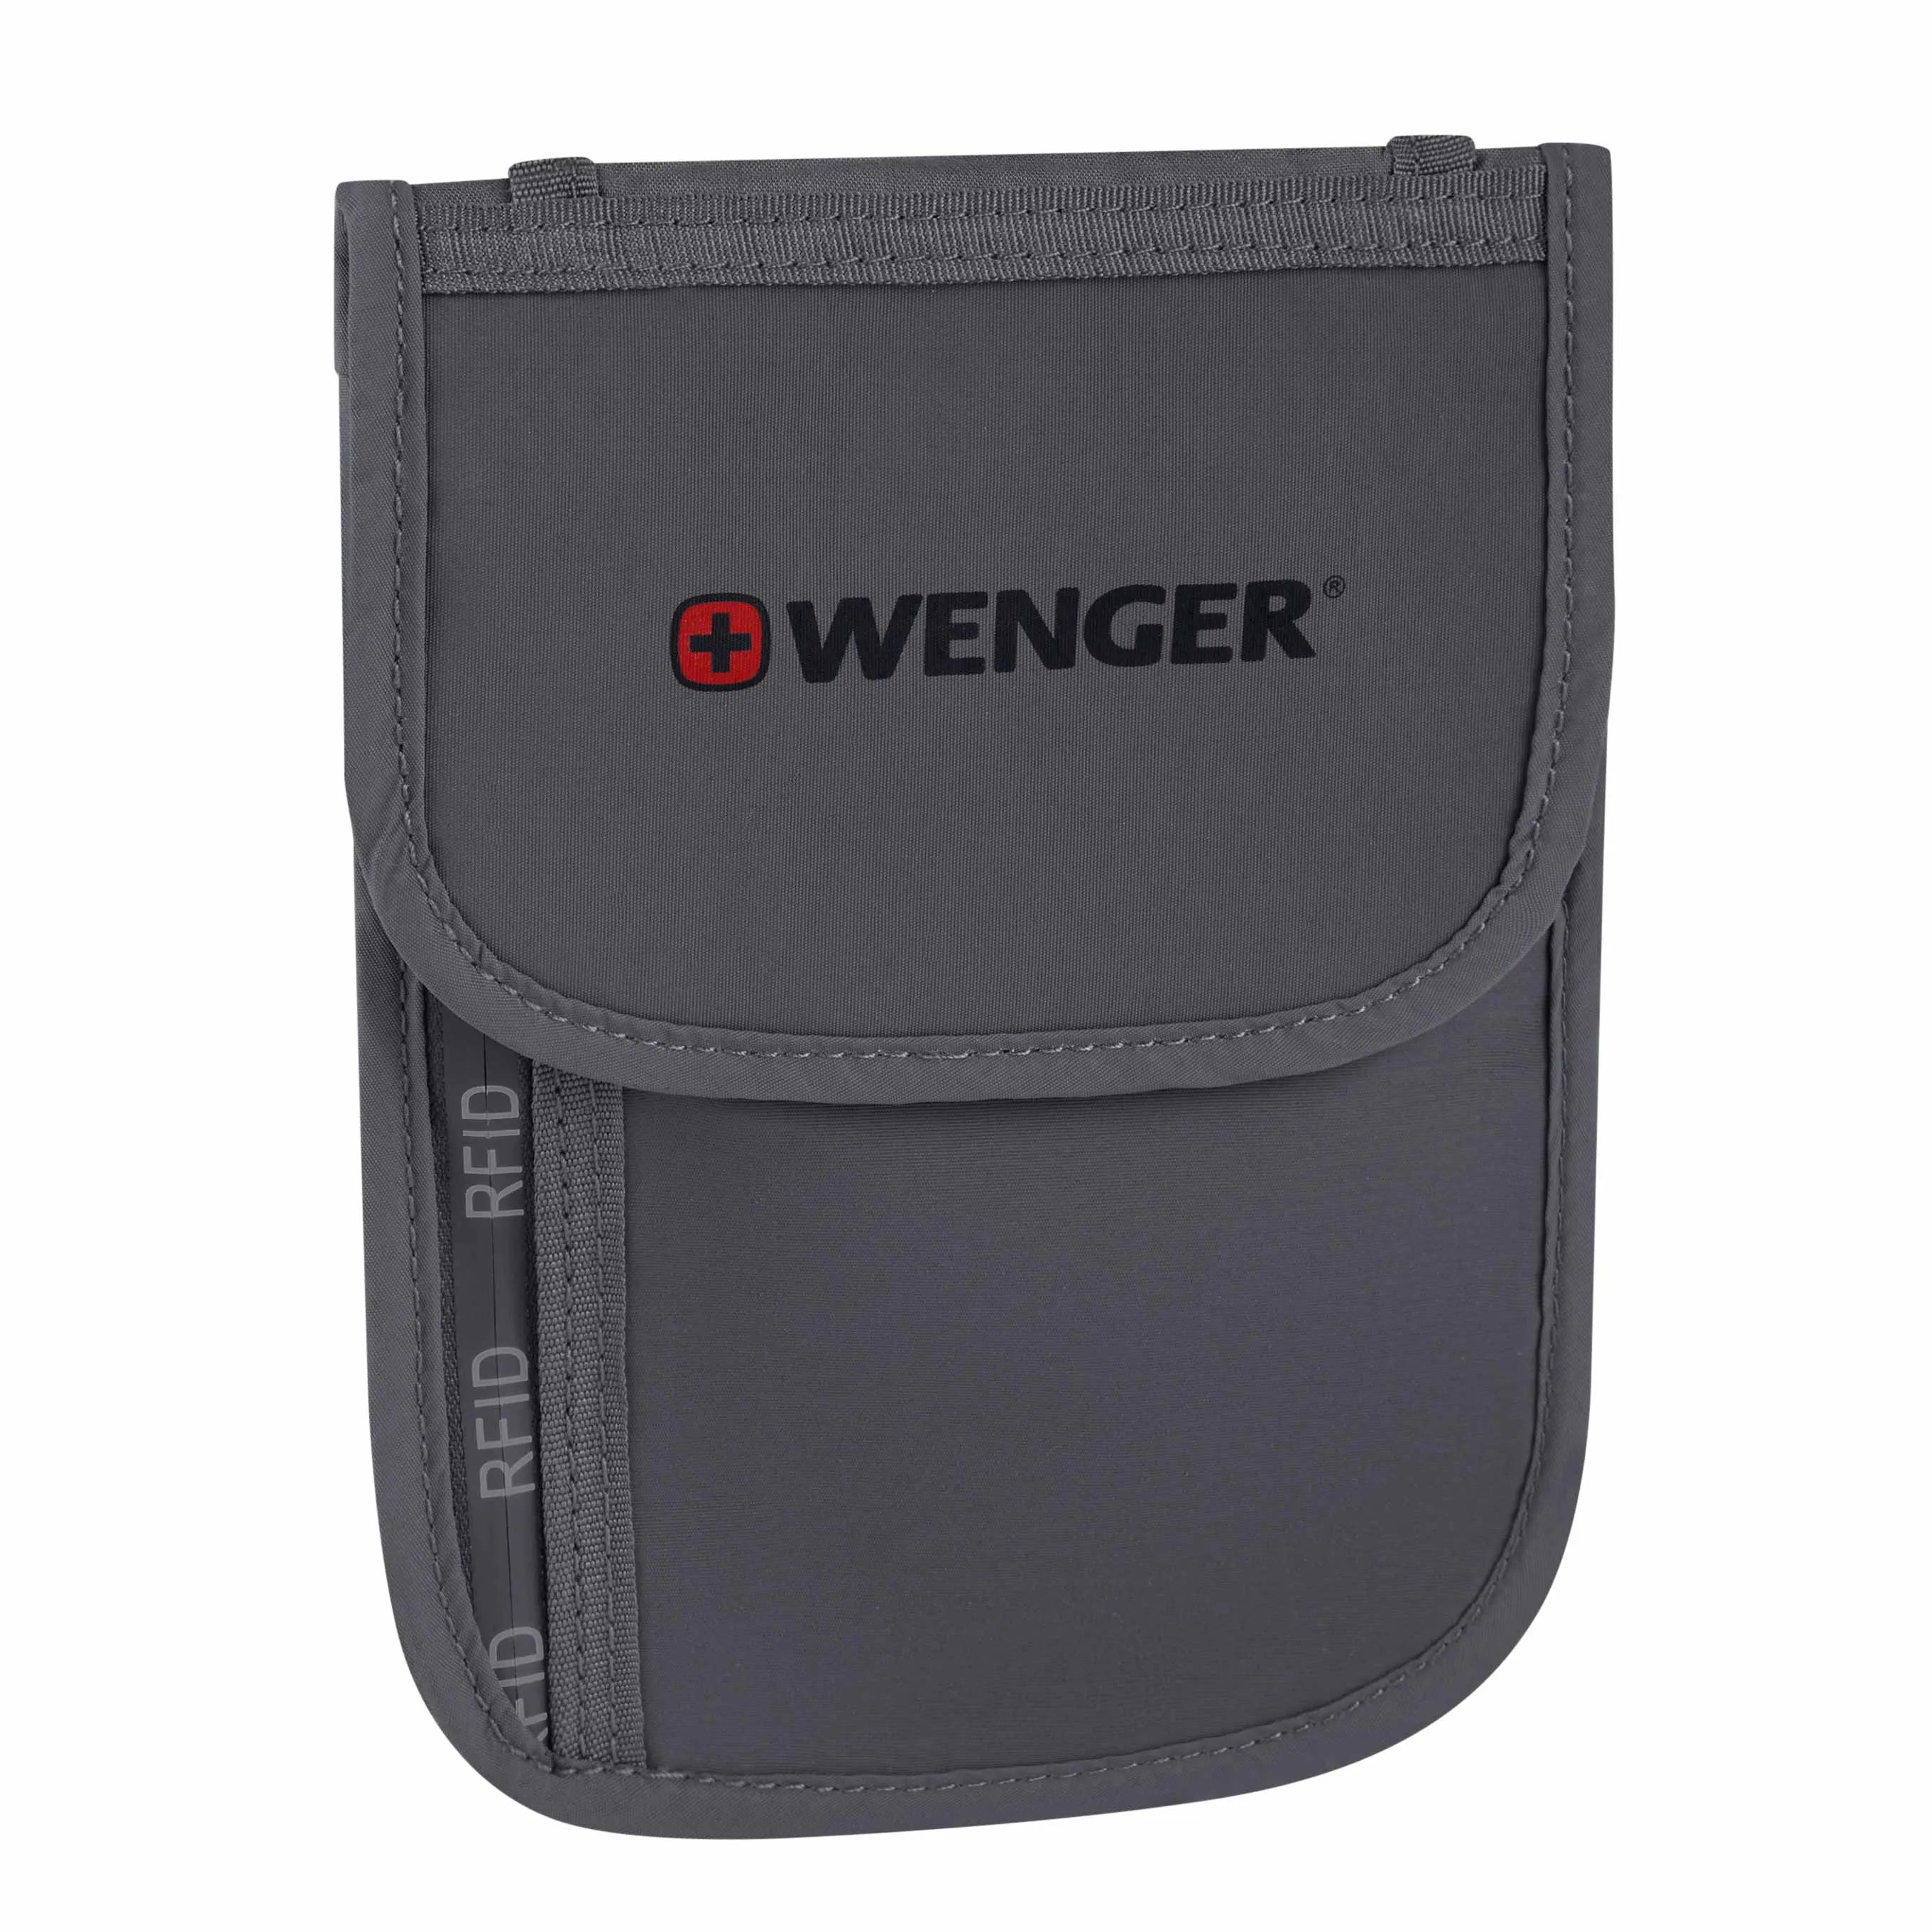 Wenger travel accessories RFID chest pouch for travel documents 19 cm - Grey